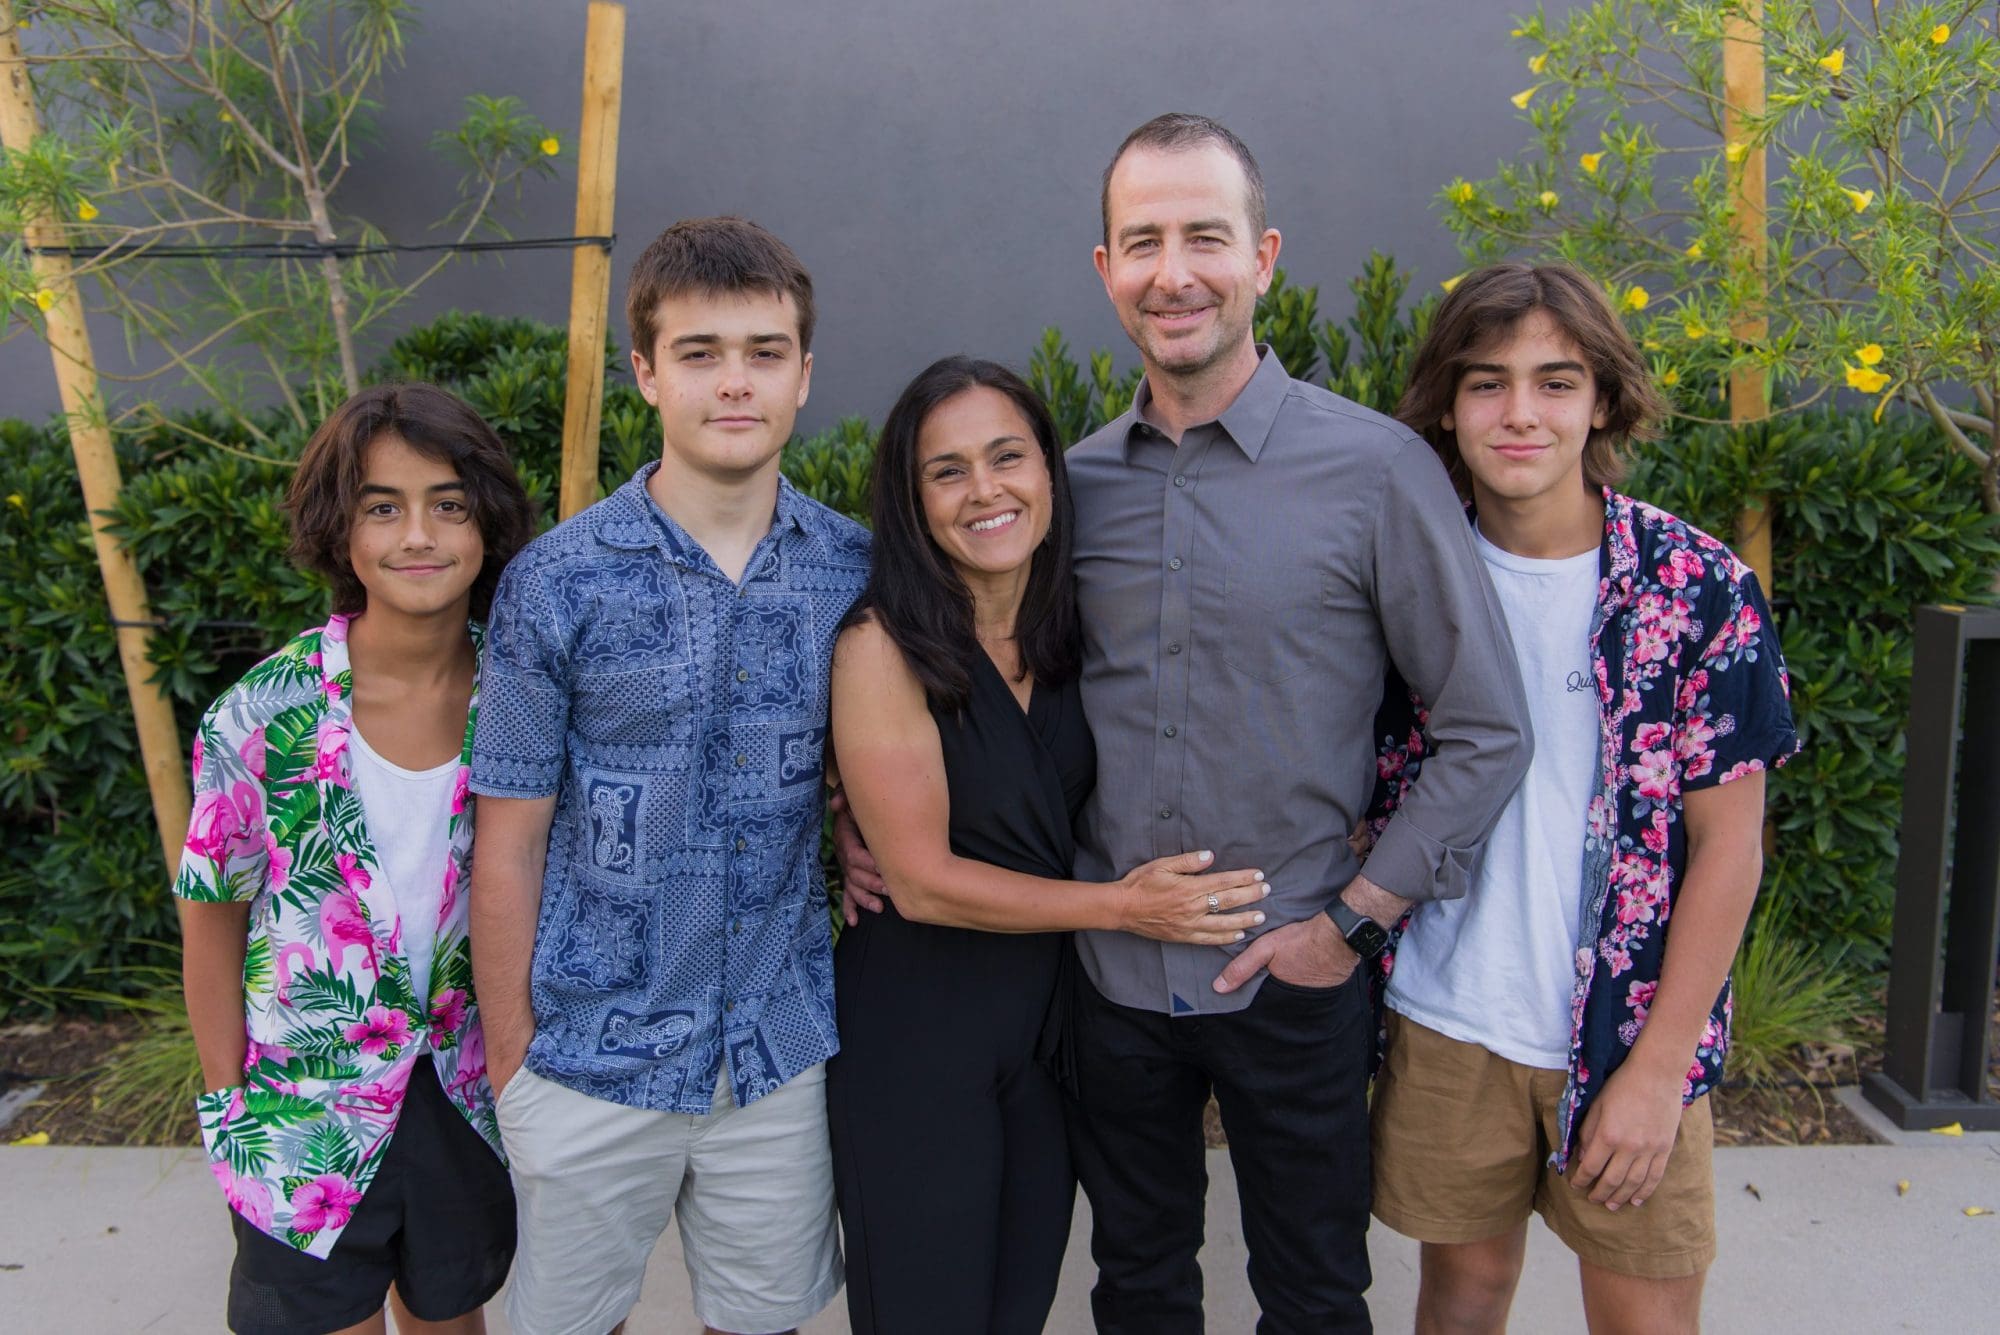 A happy family of five, with three teenage boys and their parents, standing together outdoors, joyfully smiling at the camera in front of a garden and a dark wall.